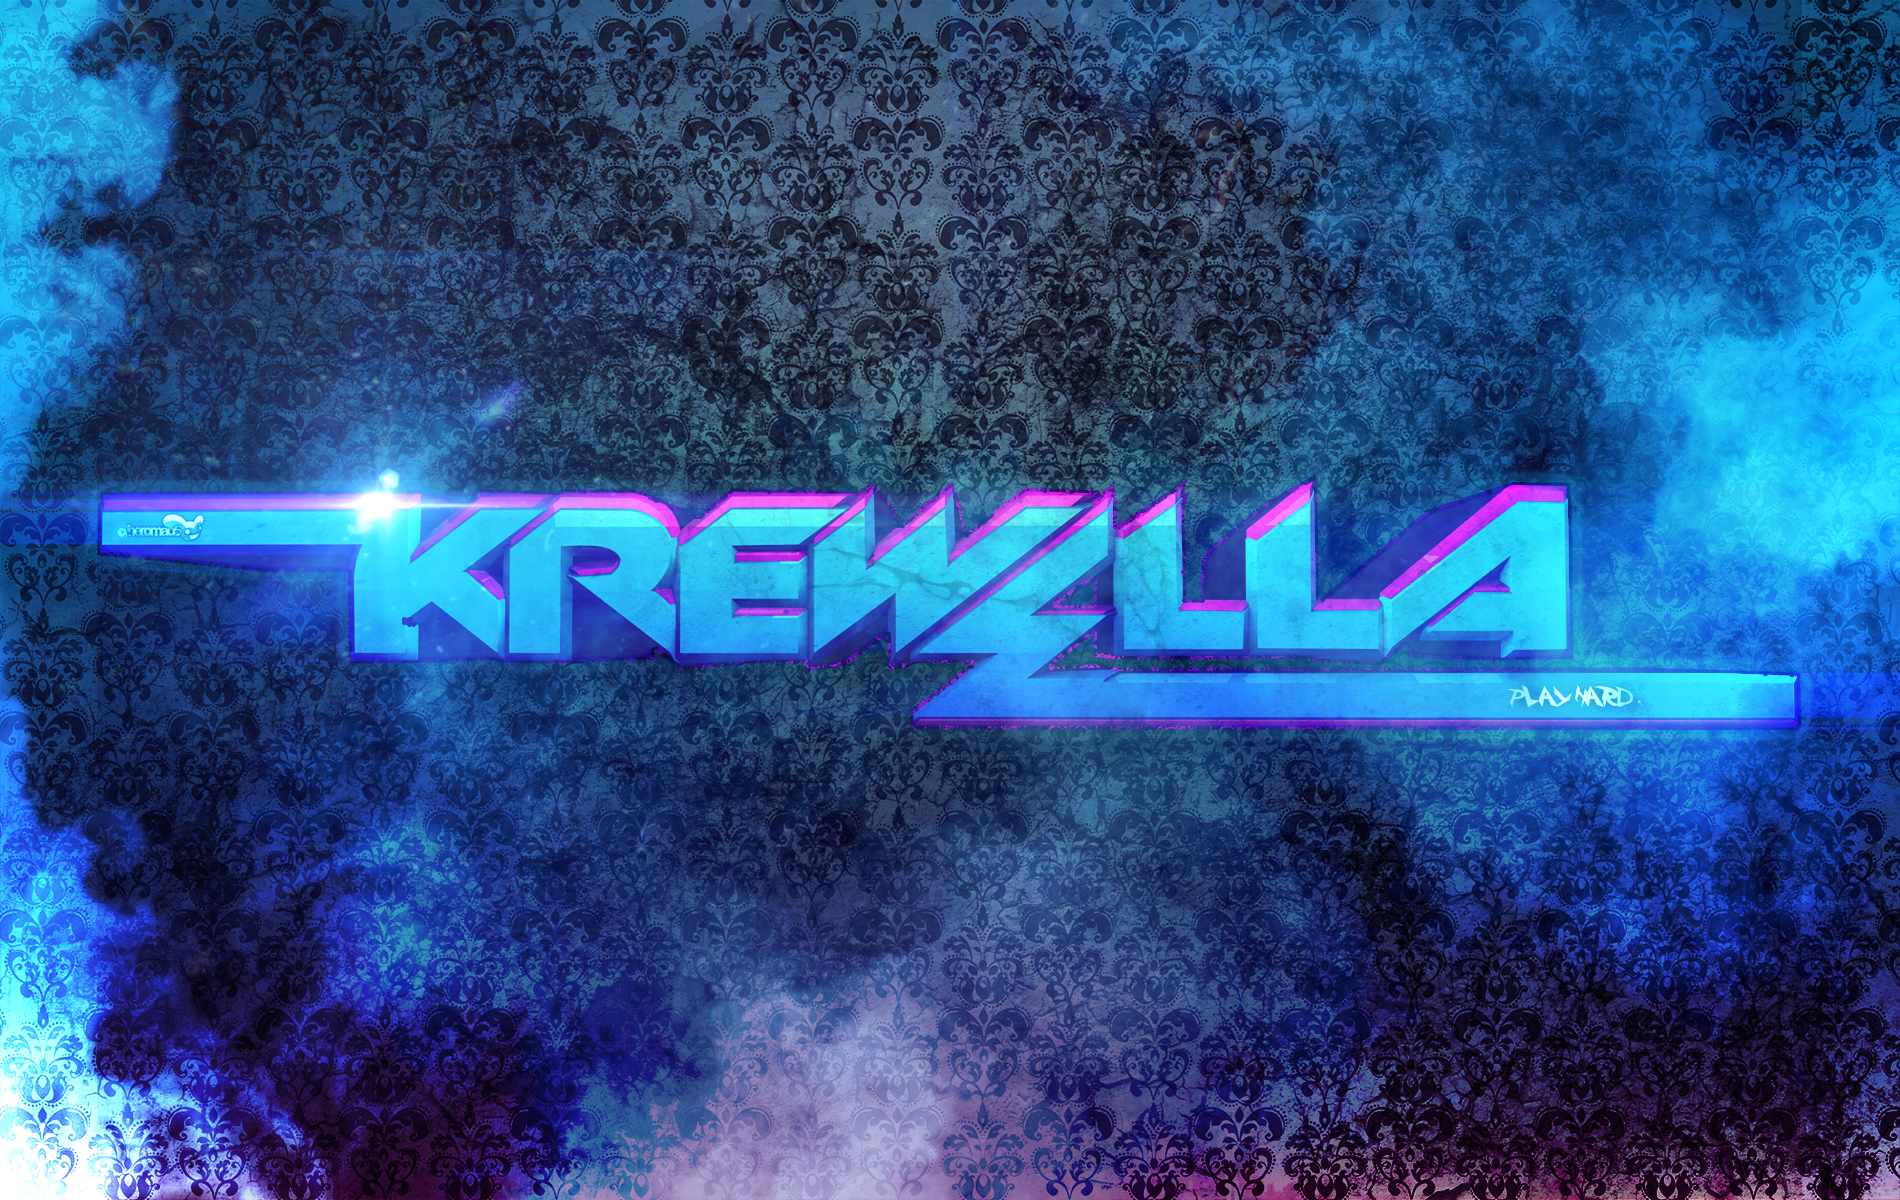 Krewella Image Led On Edm HD Wallpaper And Background